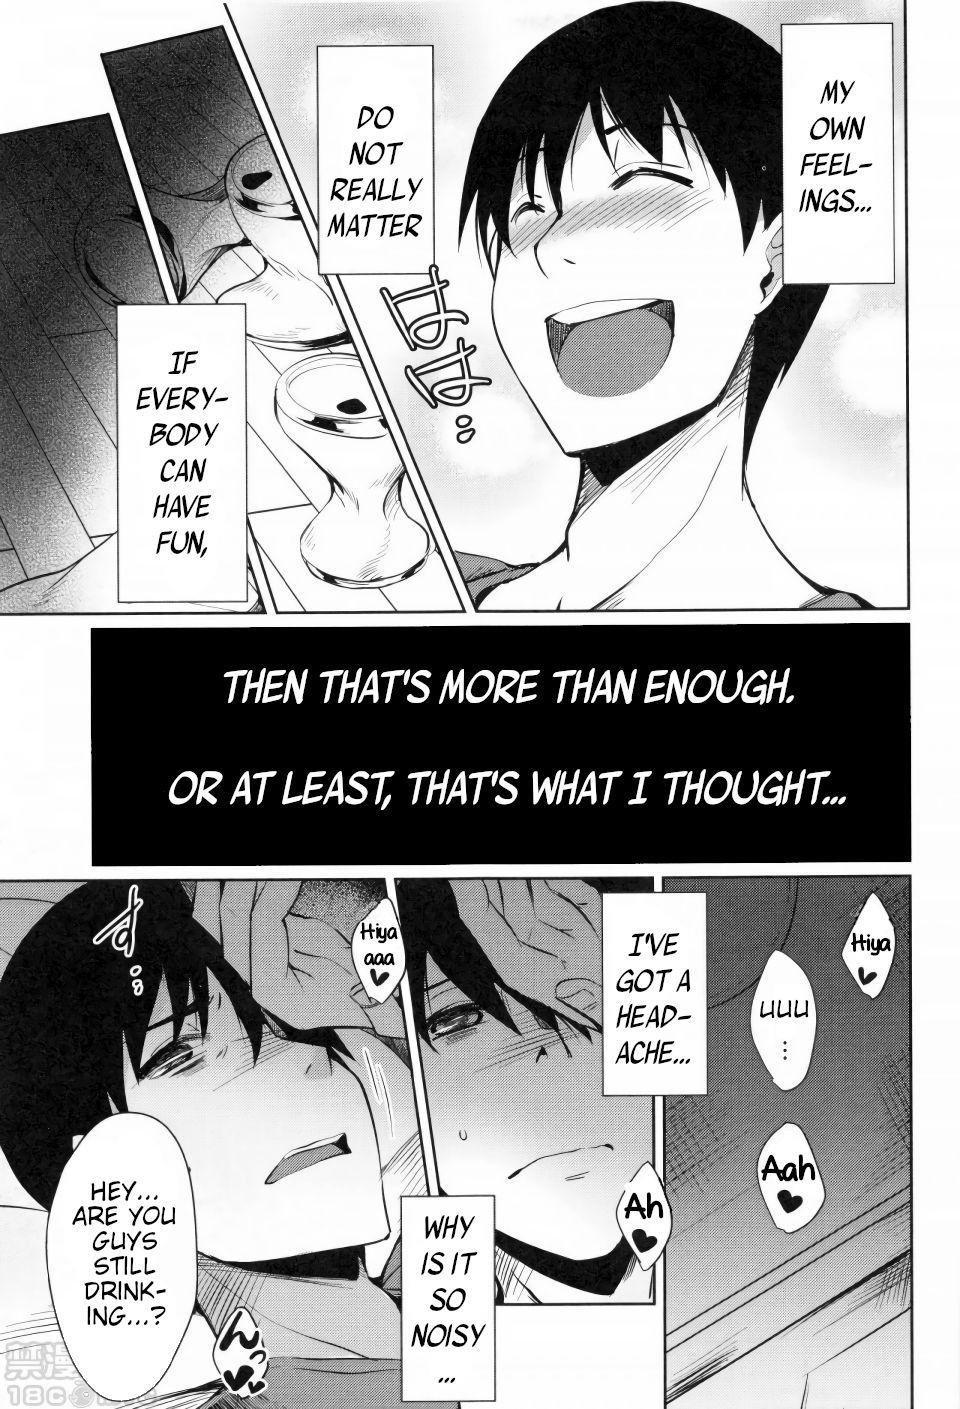 Swallowing Modoranai Daisuki | Love That's Changed Forever Hardcoresex - Page 9